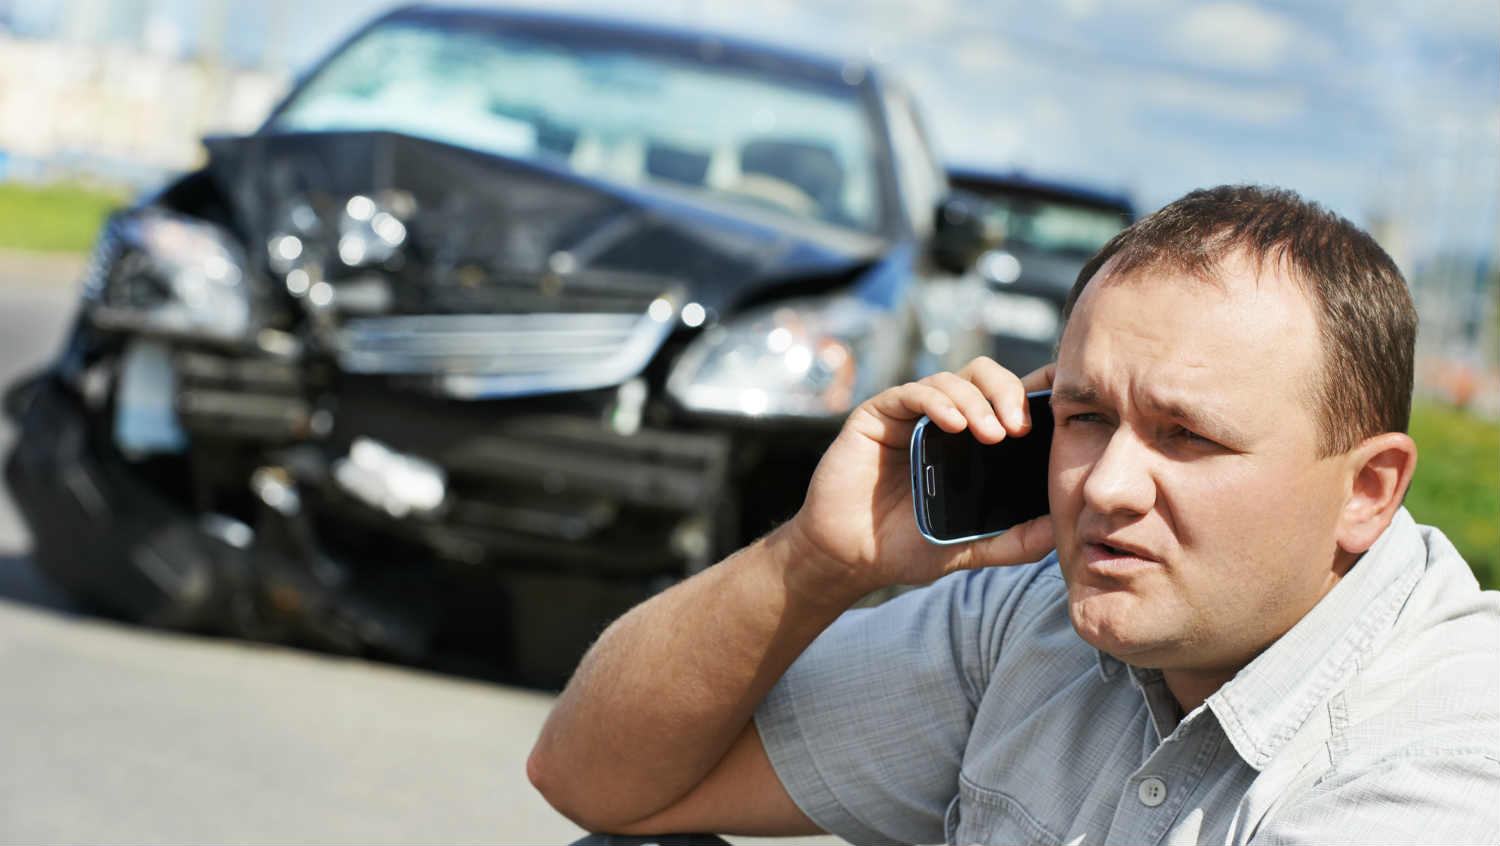 man on phone after accident